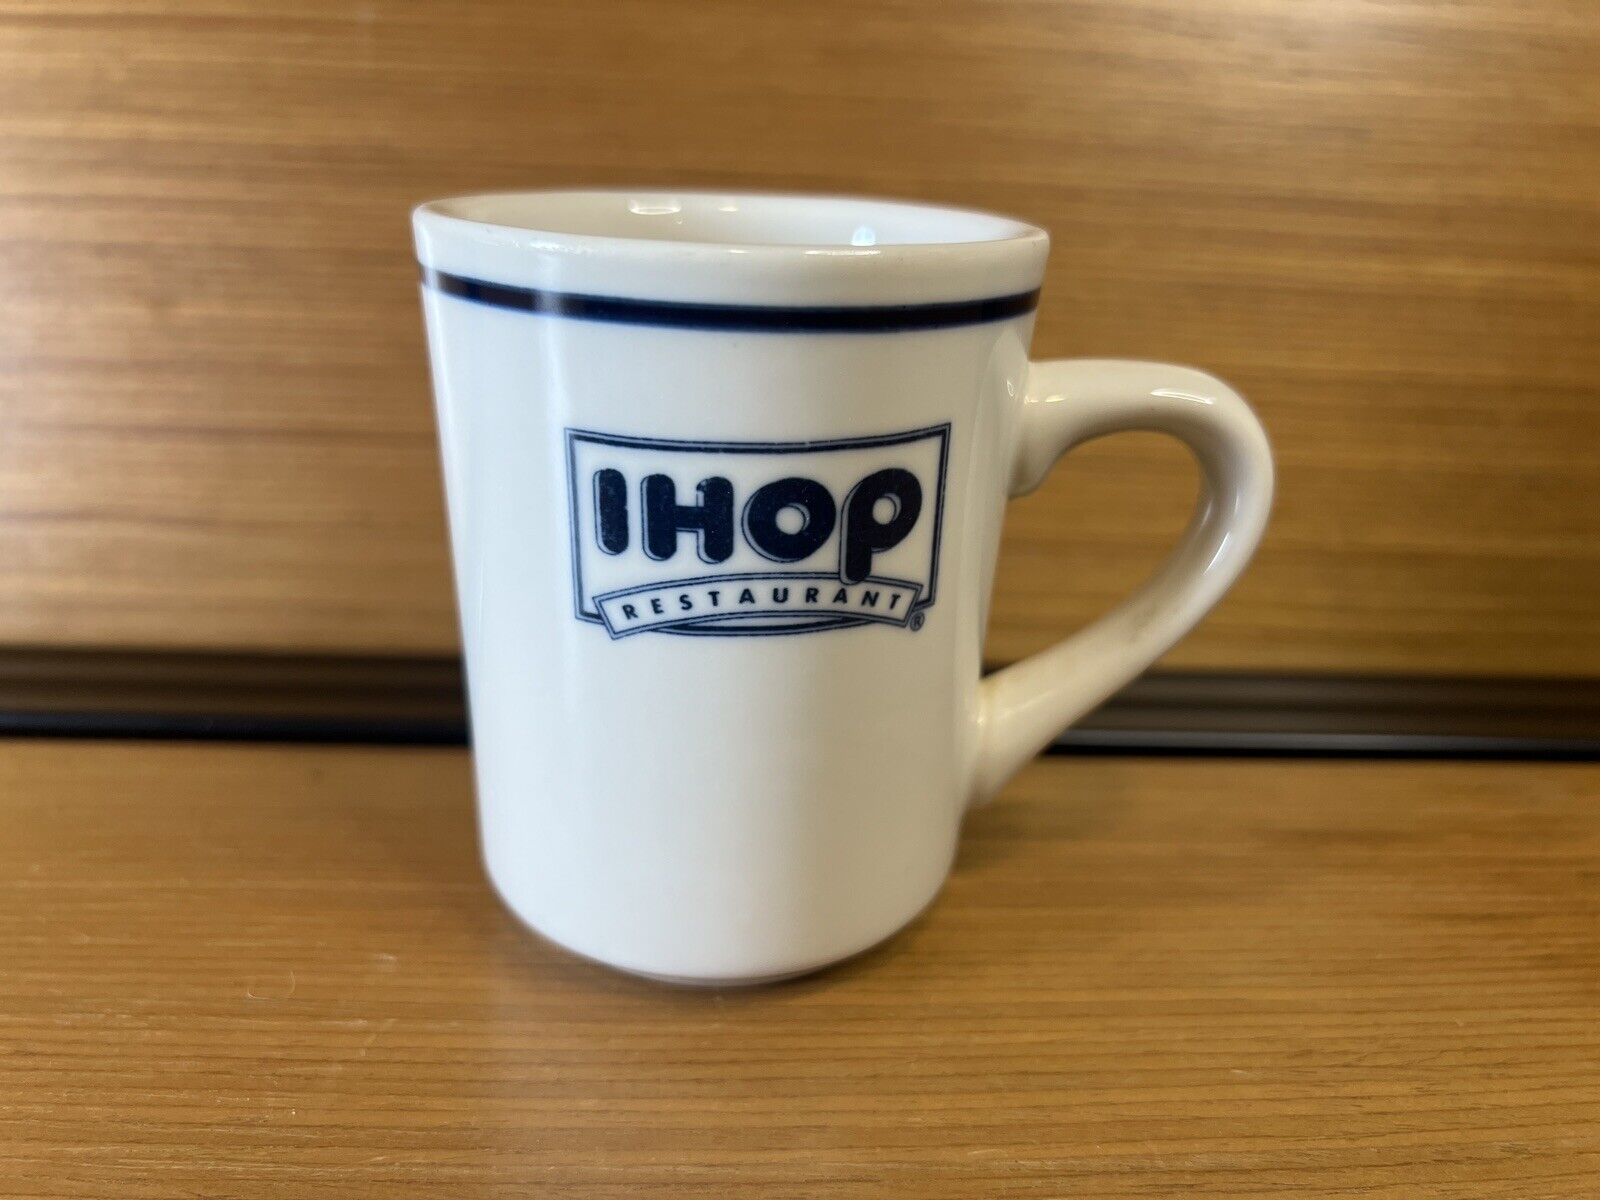 Delco IHOP Coffee Mug Vintage Cup Restaurant Ware Blue White House of Pancakes